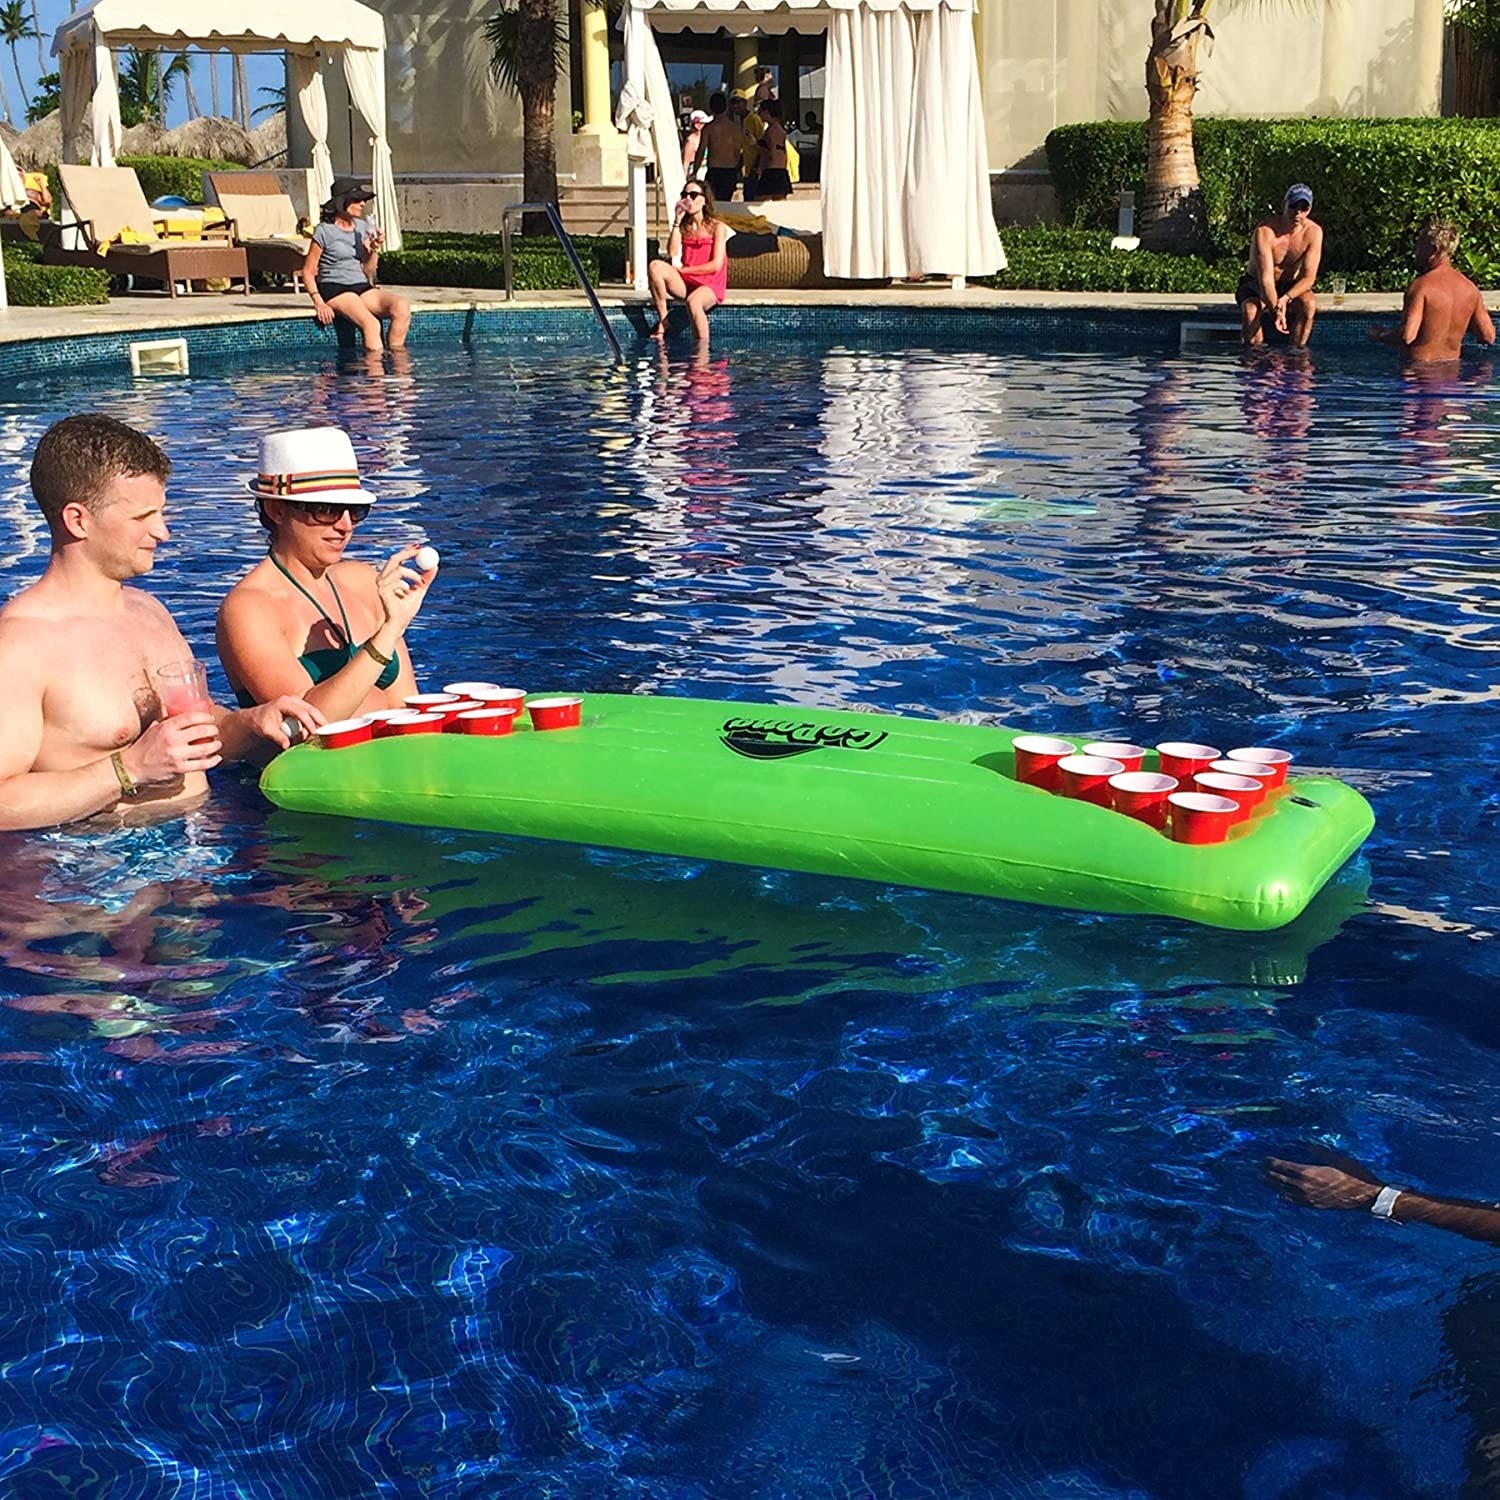 a couple of people playing beer pong at the table in the pool